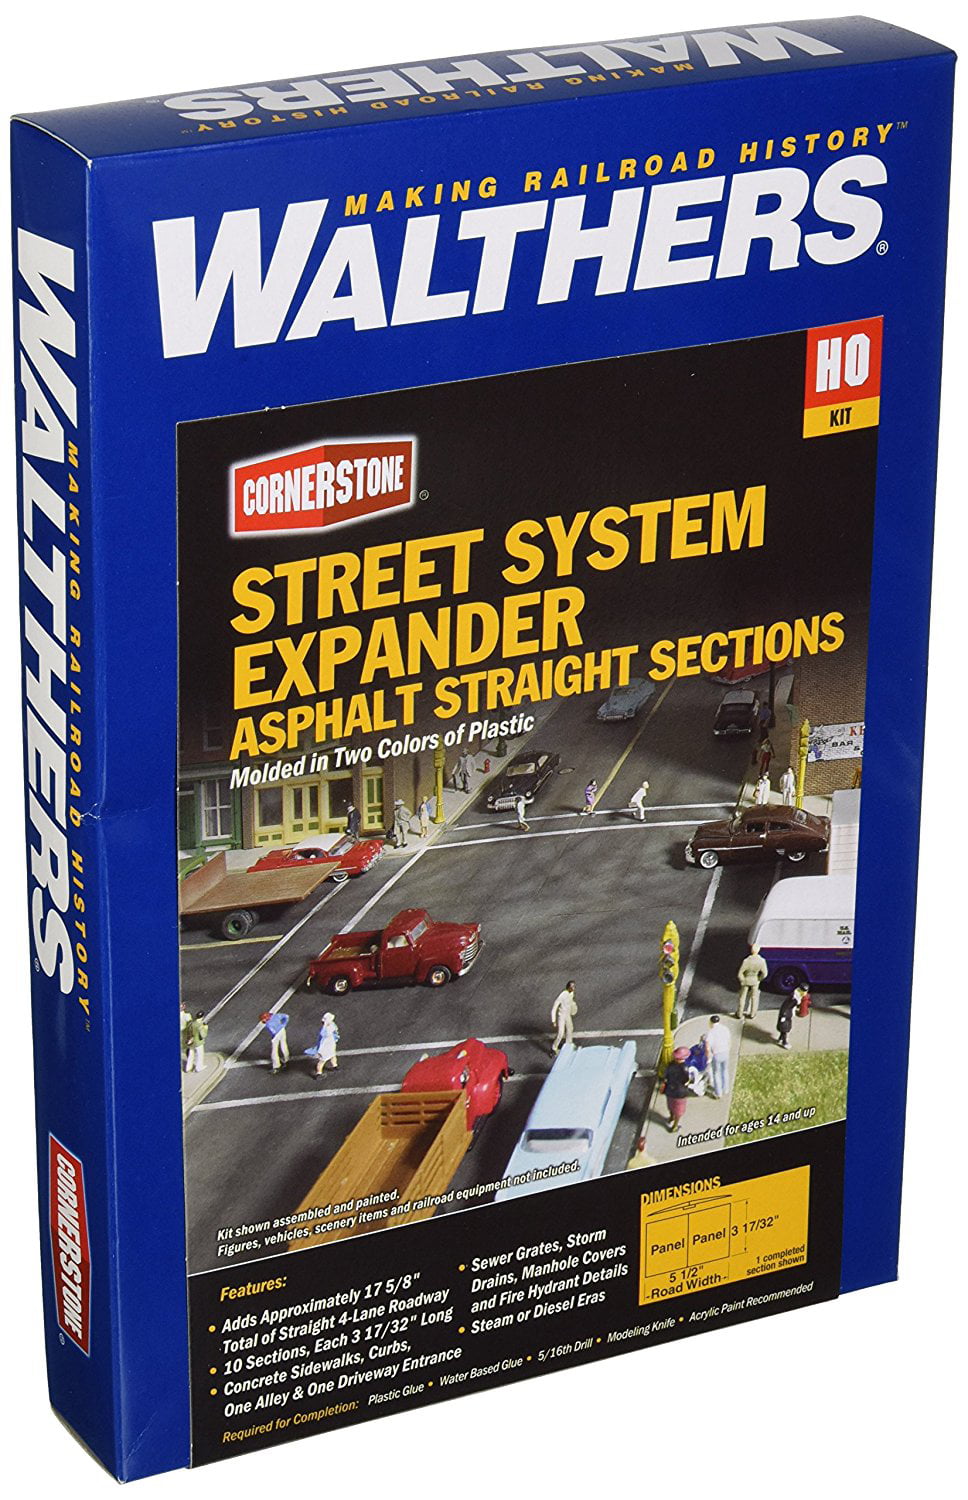 Walthers HO Scale Concrete Street System Kit 933-3138 C-10 for sale online